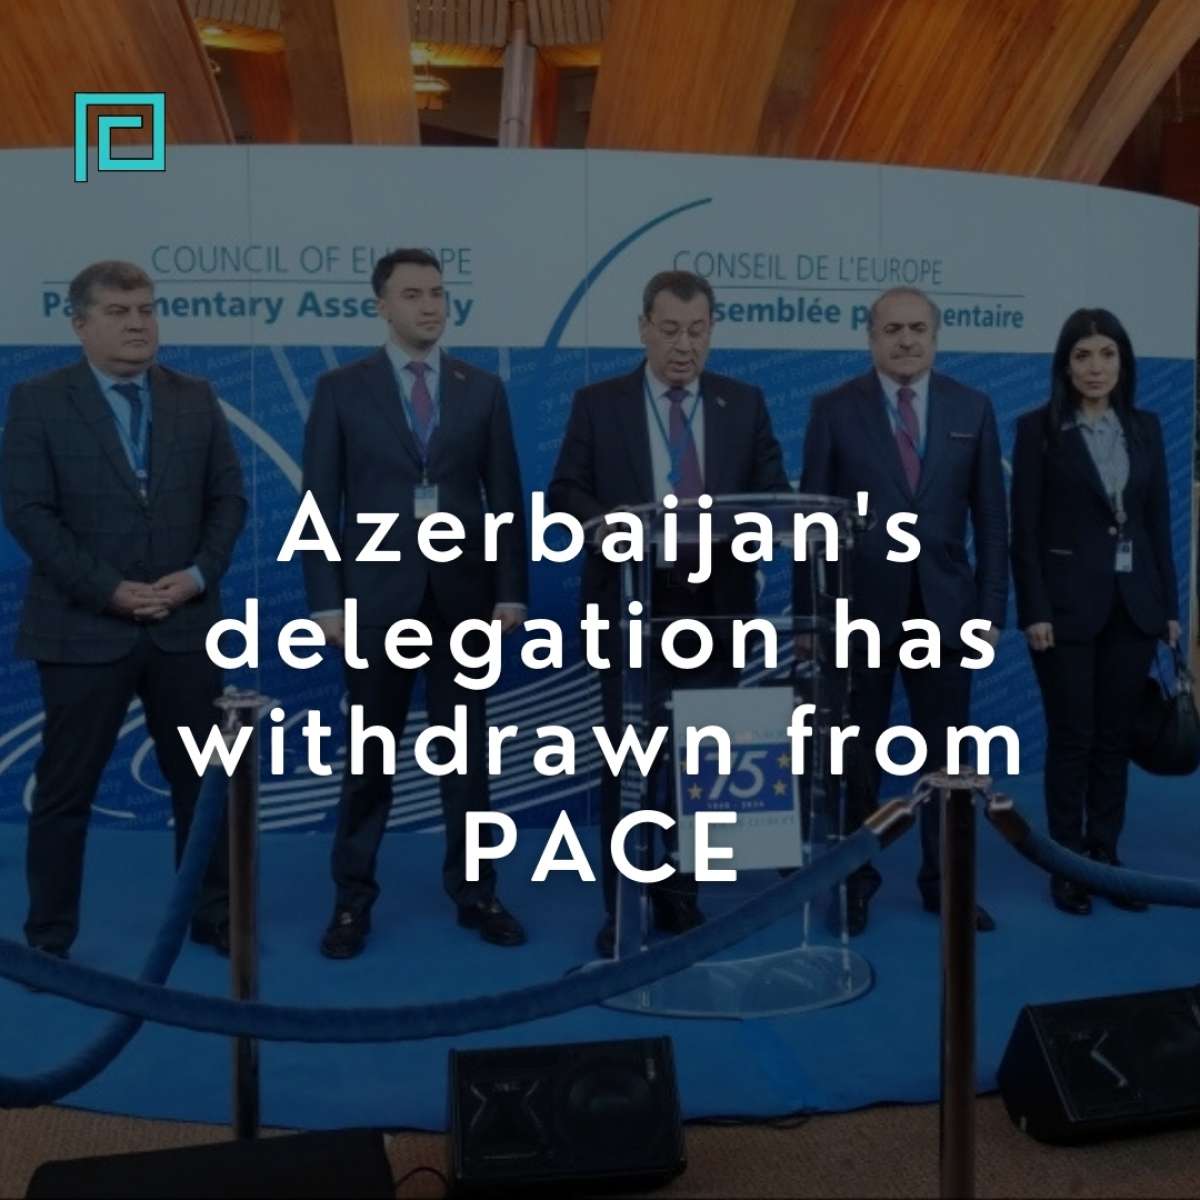 Azerbaijan's delegation has withdrawn from PACE